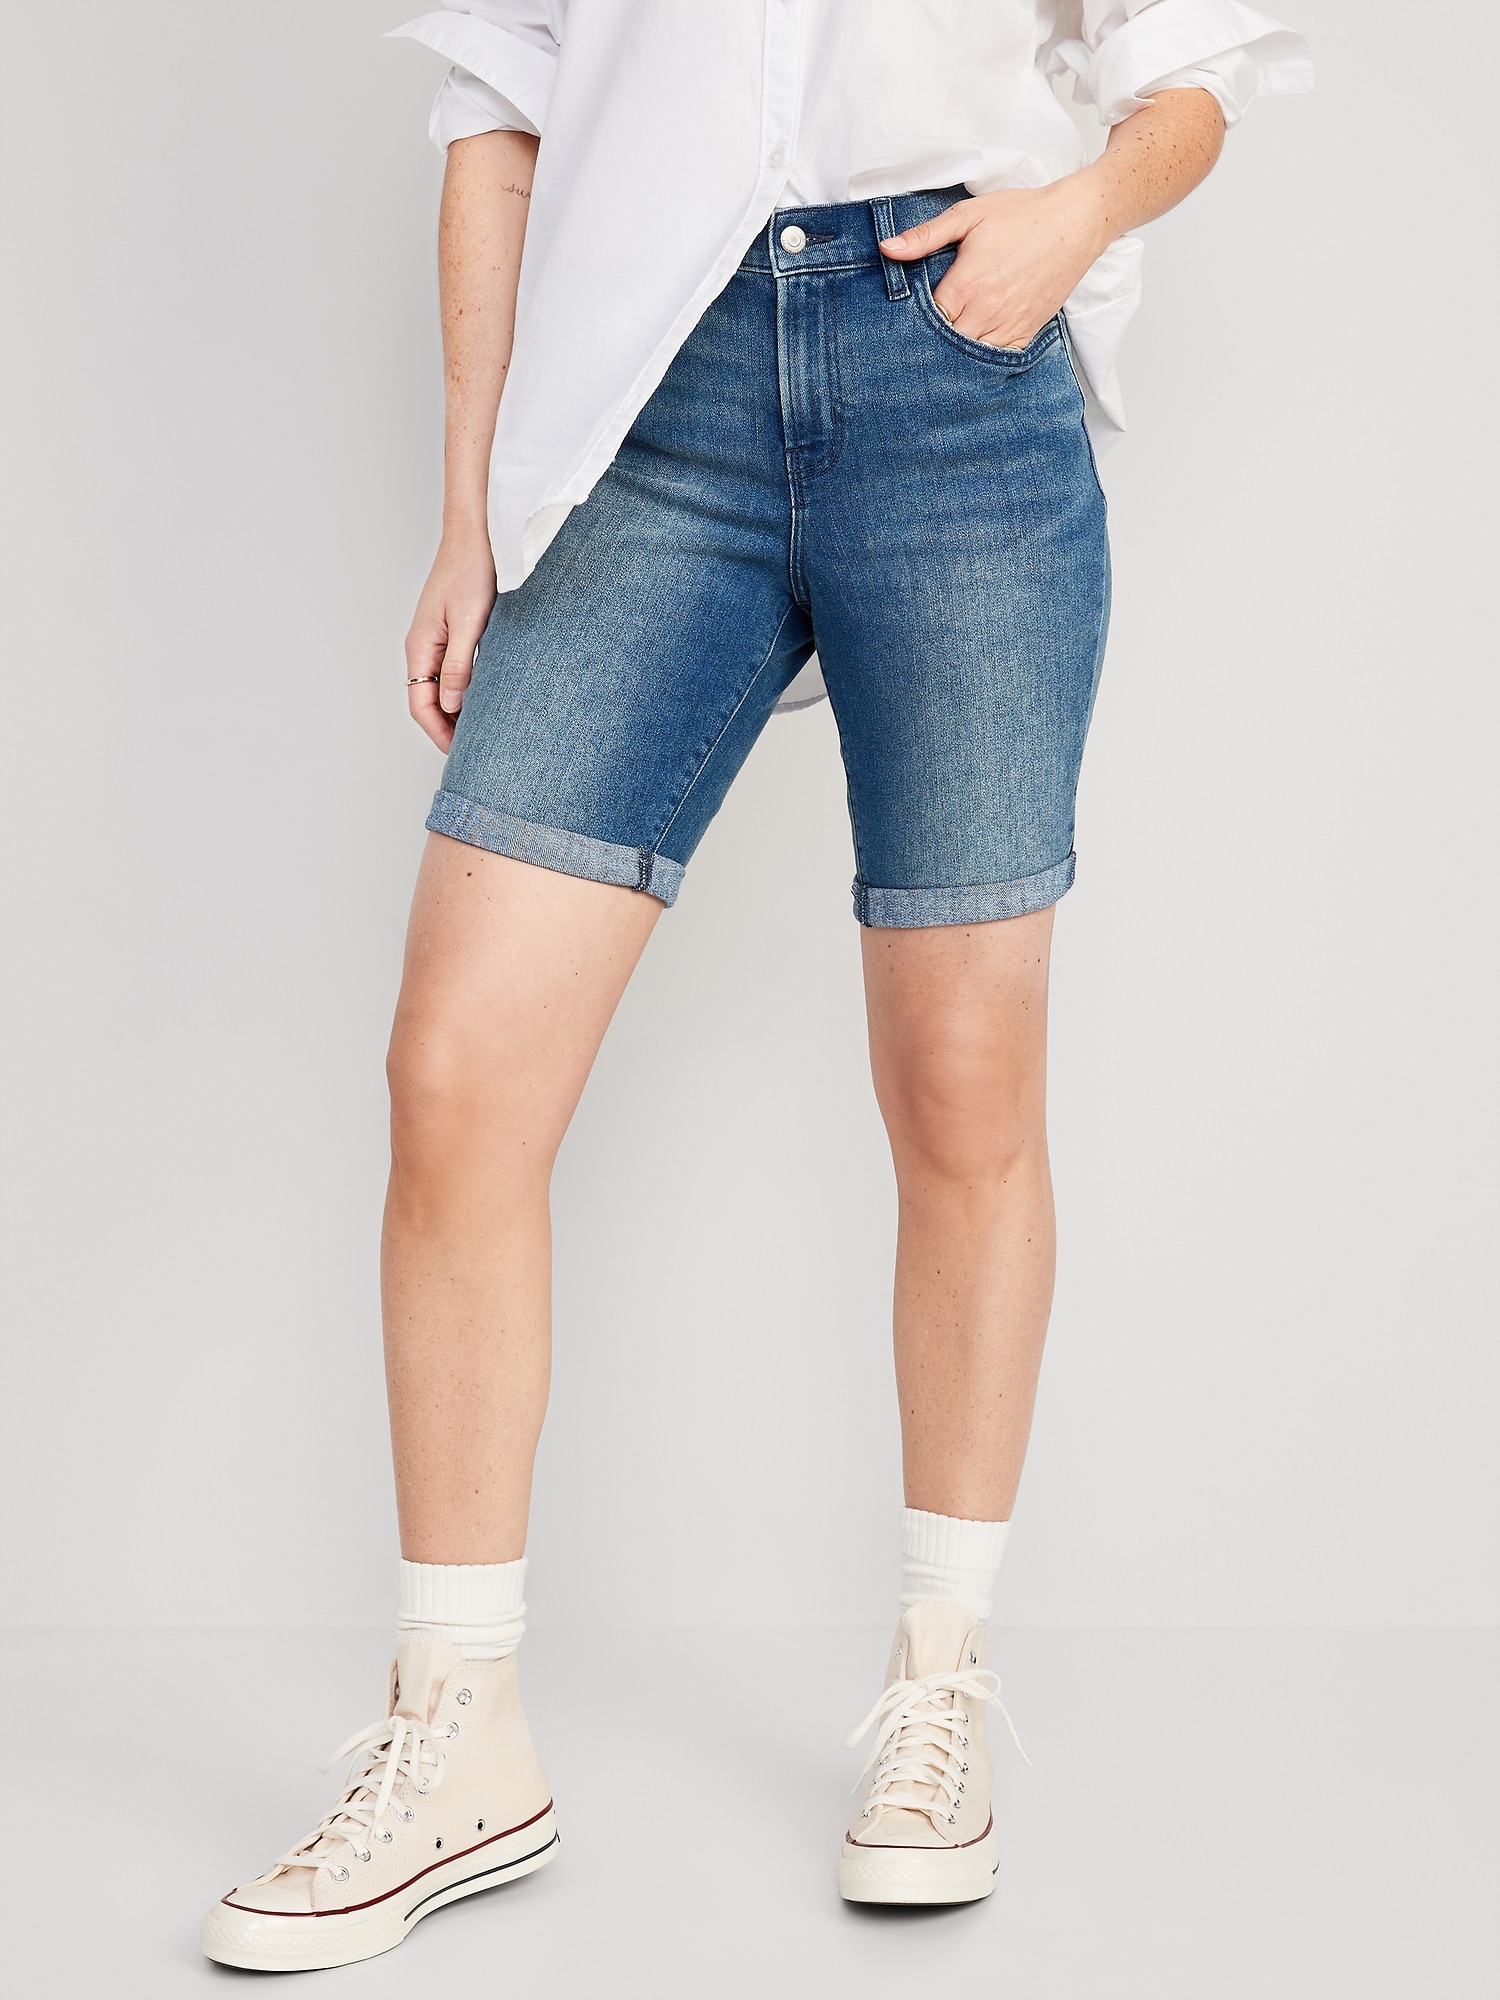 Mid-Rise Wow Jean Shorts for Women inseam | Old Navy